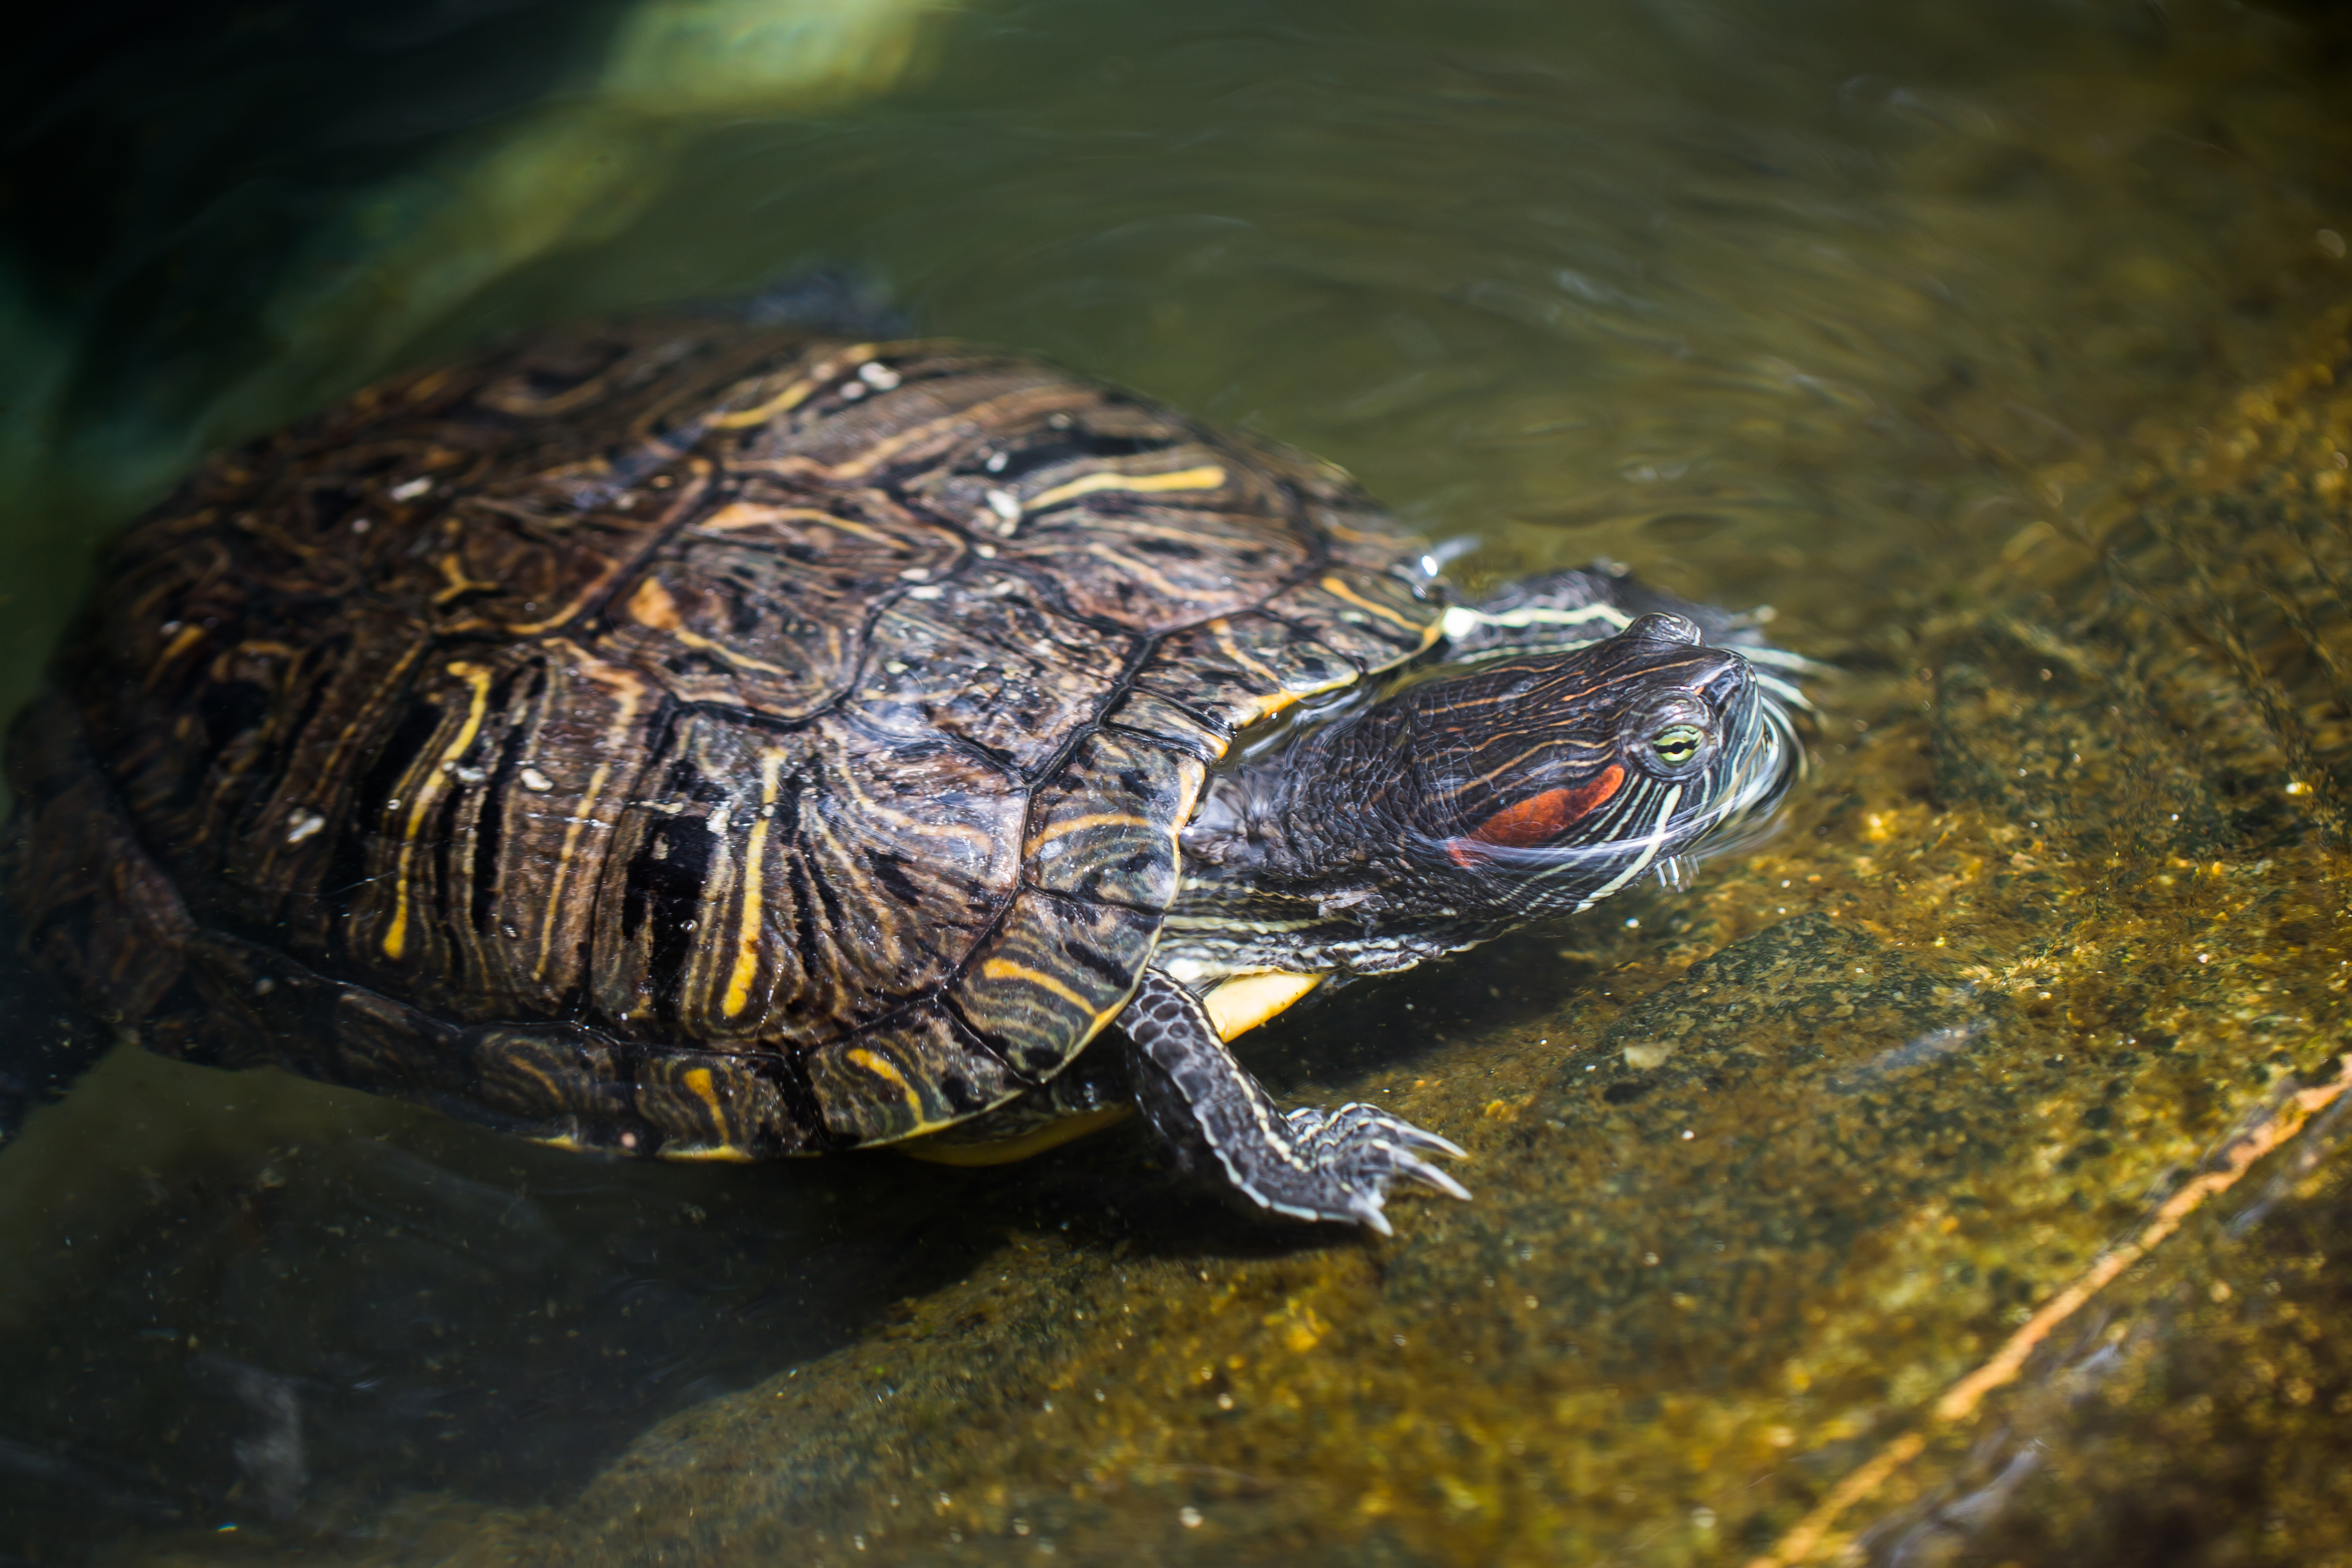 Do Red Eared Slider Turtles Shed Their Skin? 2